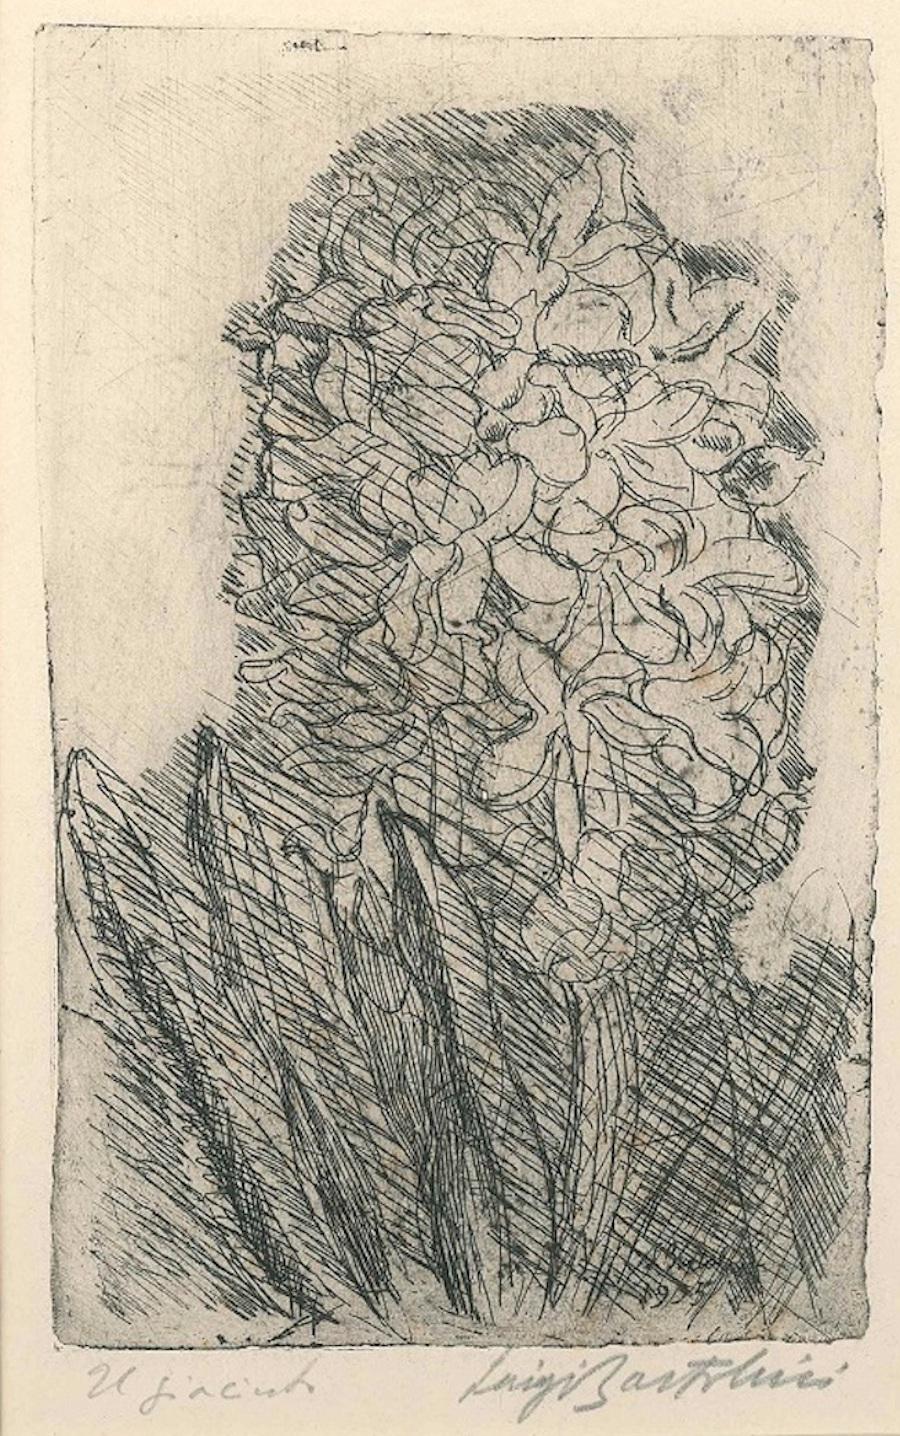 Image dimensions: 16.7 x 10.7 cm.

This is an original etching realized by Luigi Bartolini in 1934. Hand signed in pencil on the lower right and titled on the lower left.

Very good conditions except some light stains on the margins.

This artwork